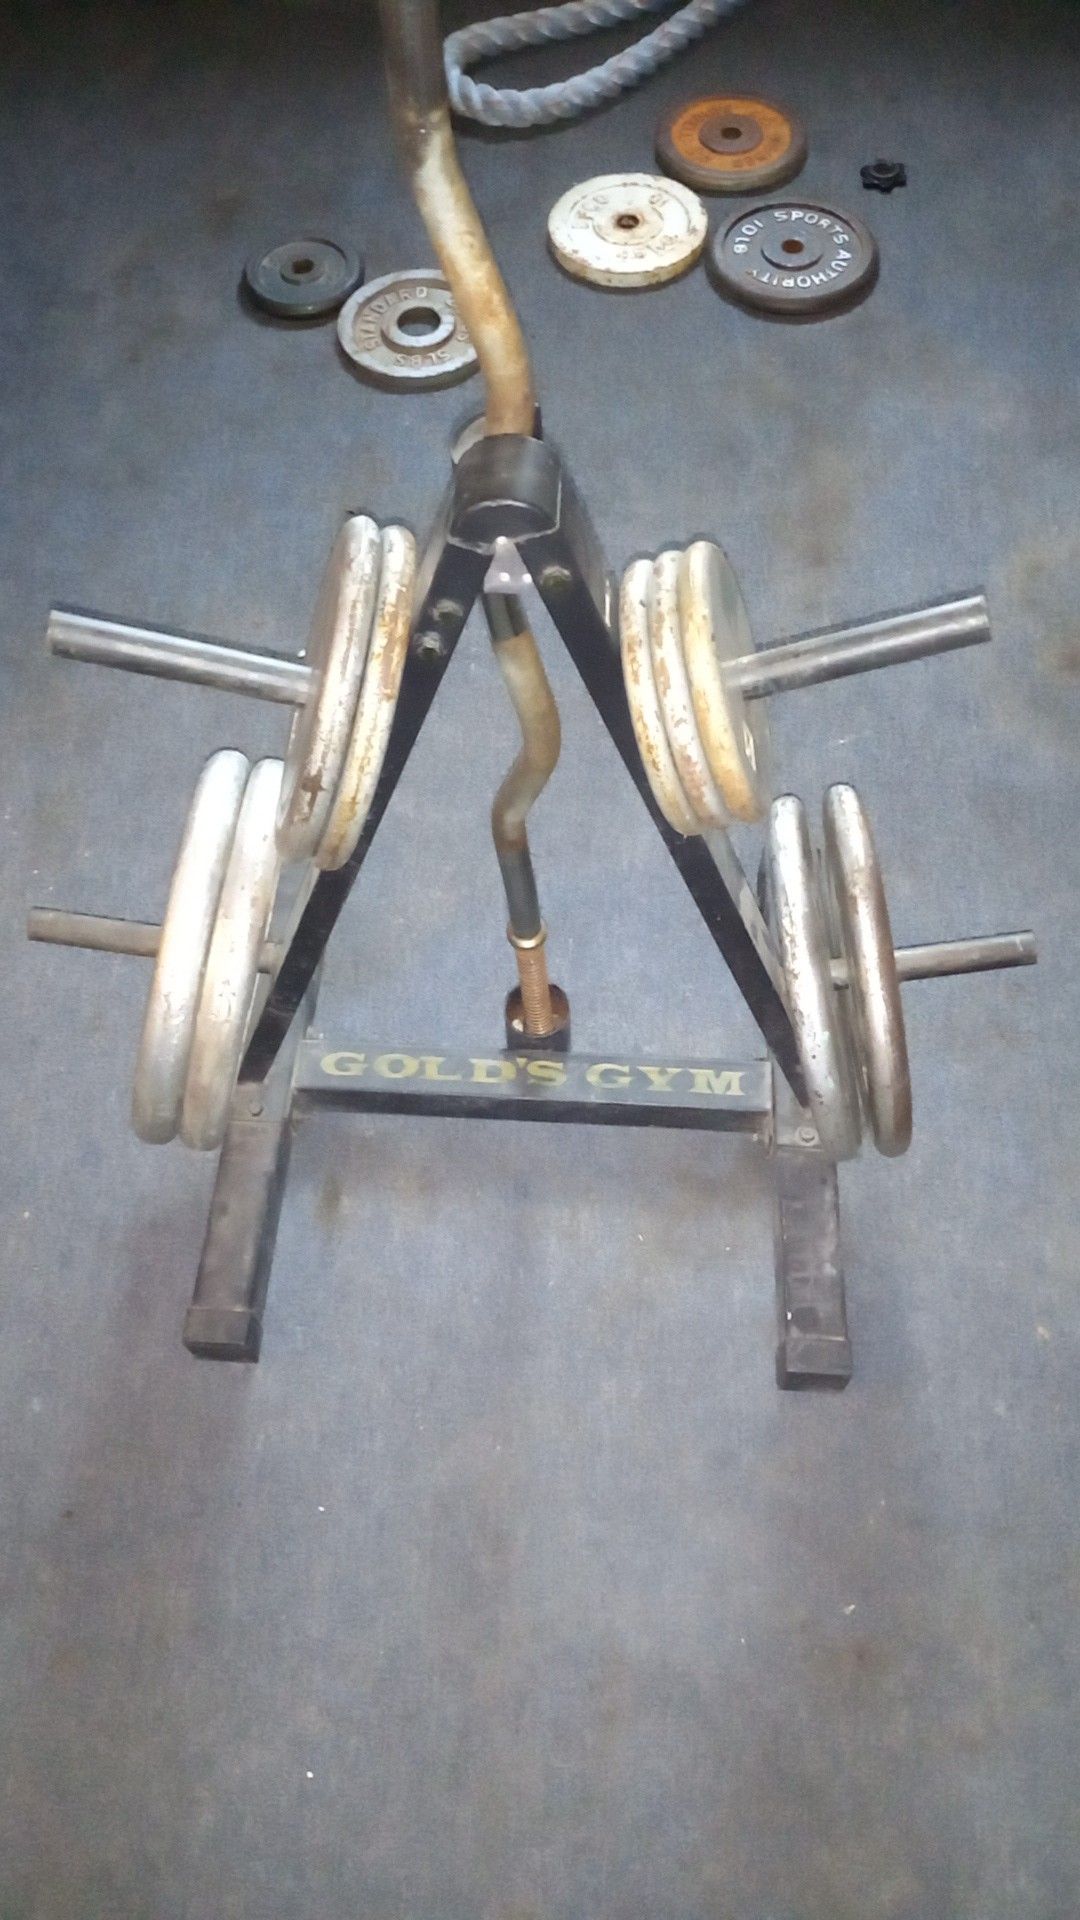 Weights with rack and curling bar